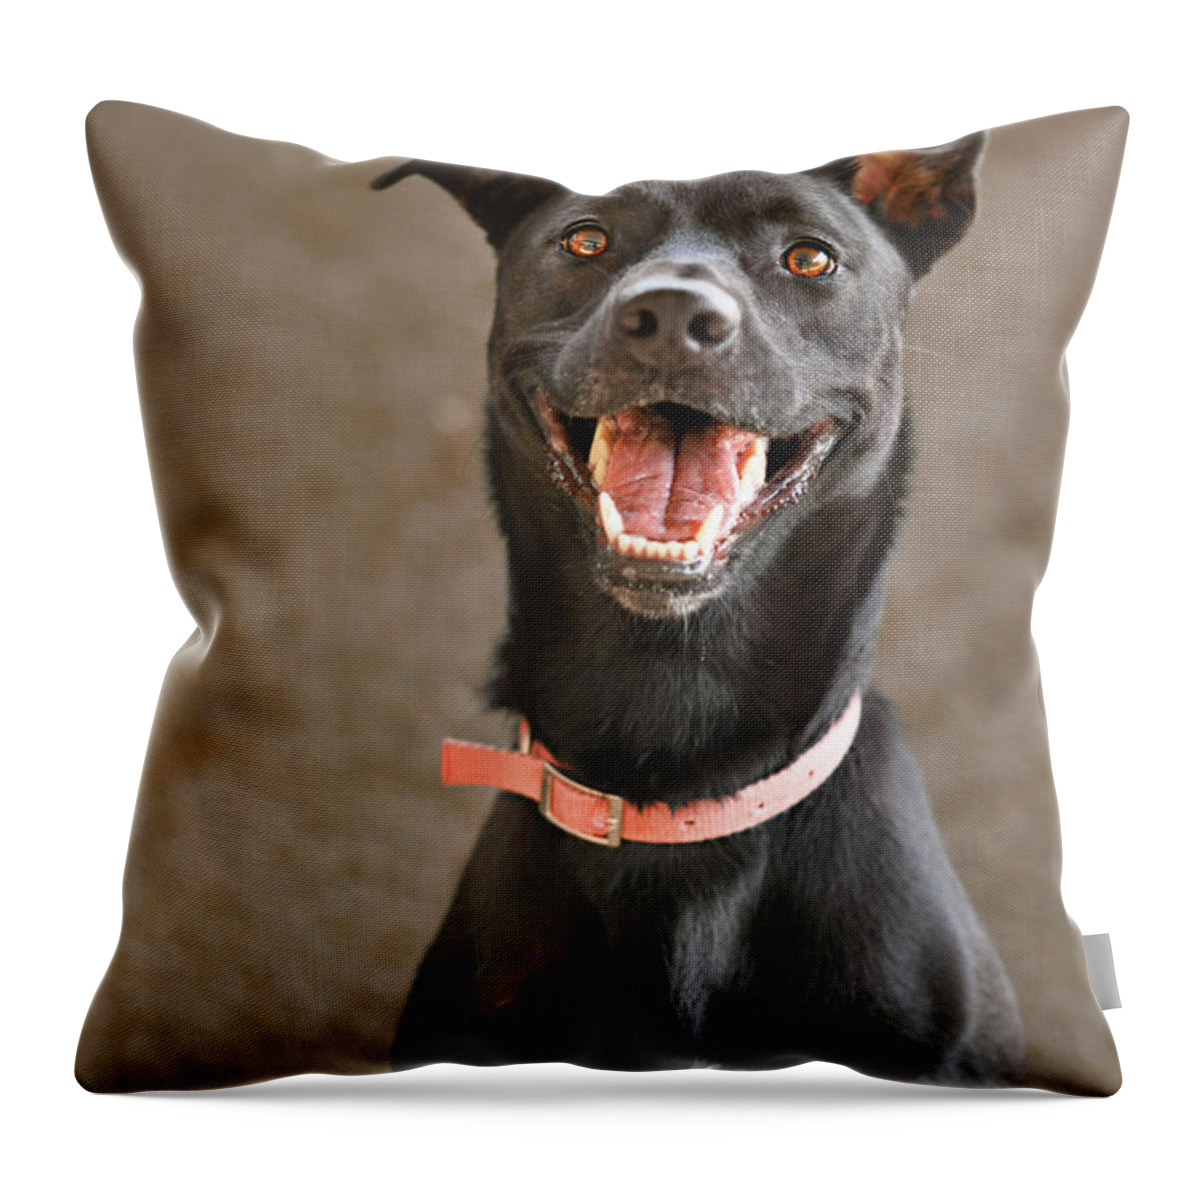 Pets Throw Pillow featuring the photograph Black Lab With Orange Collar by Hillary Kladke